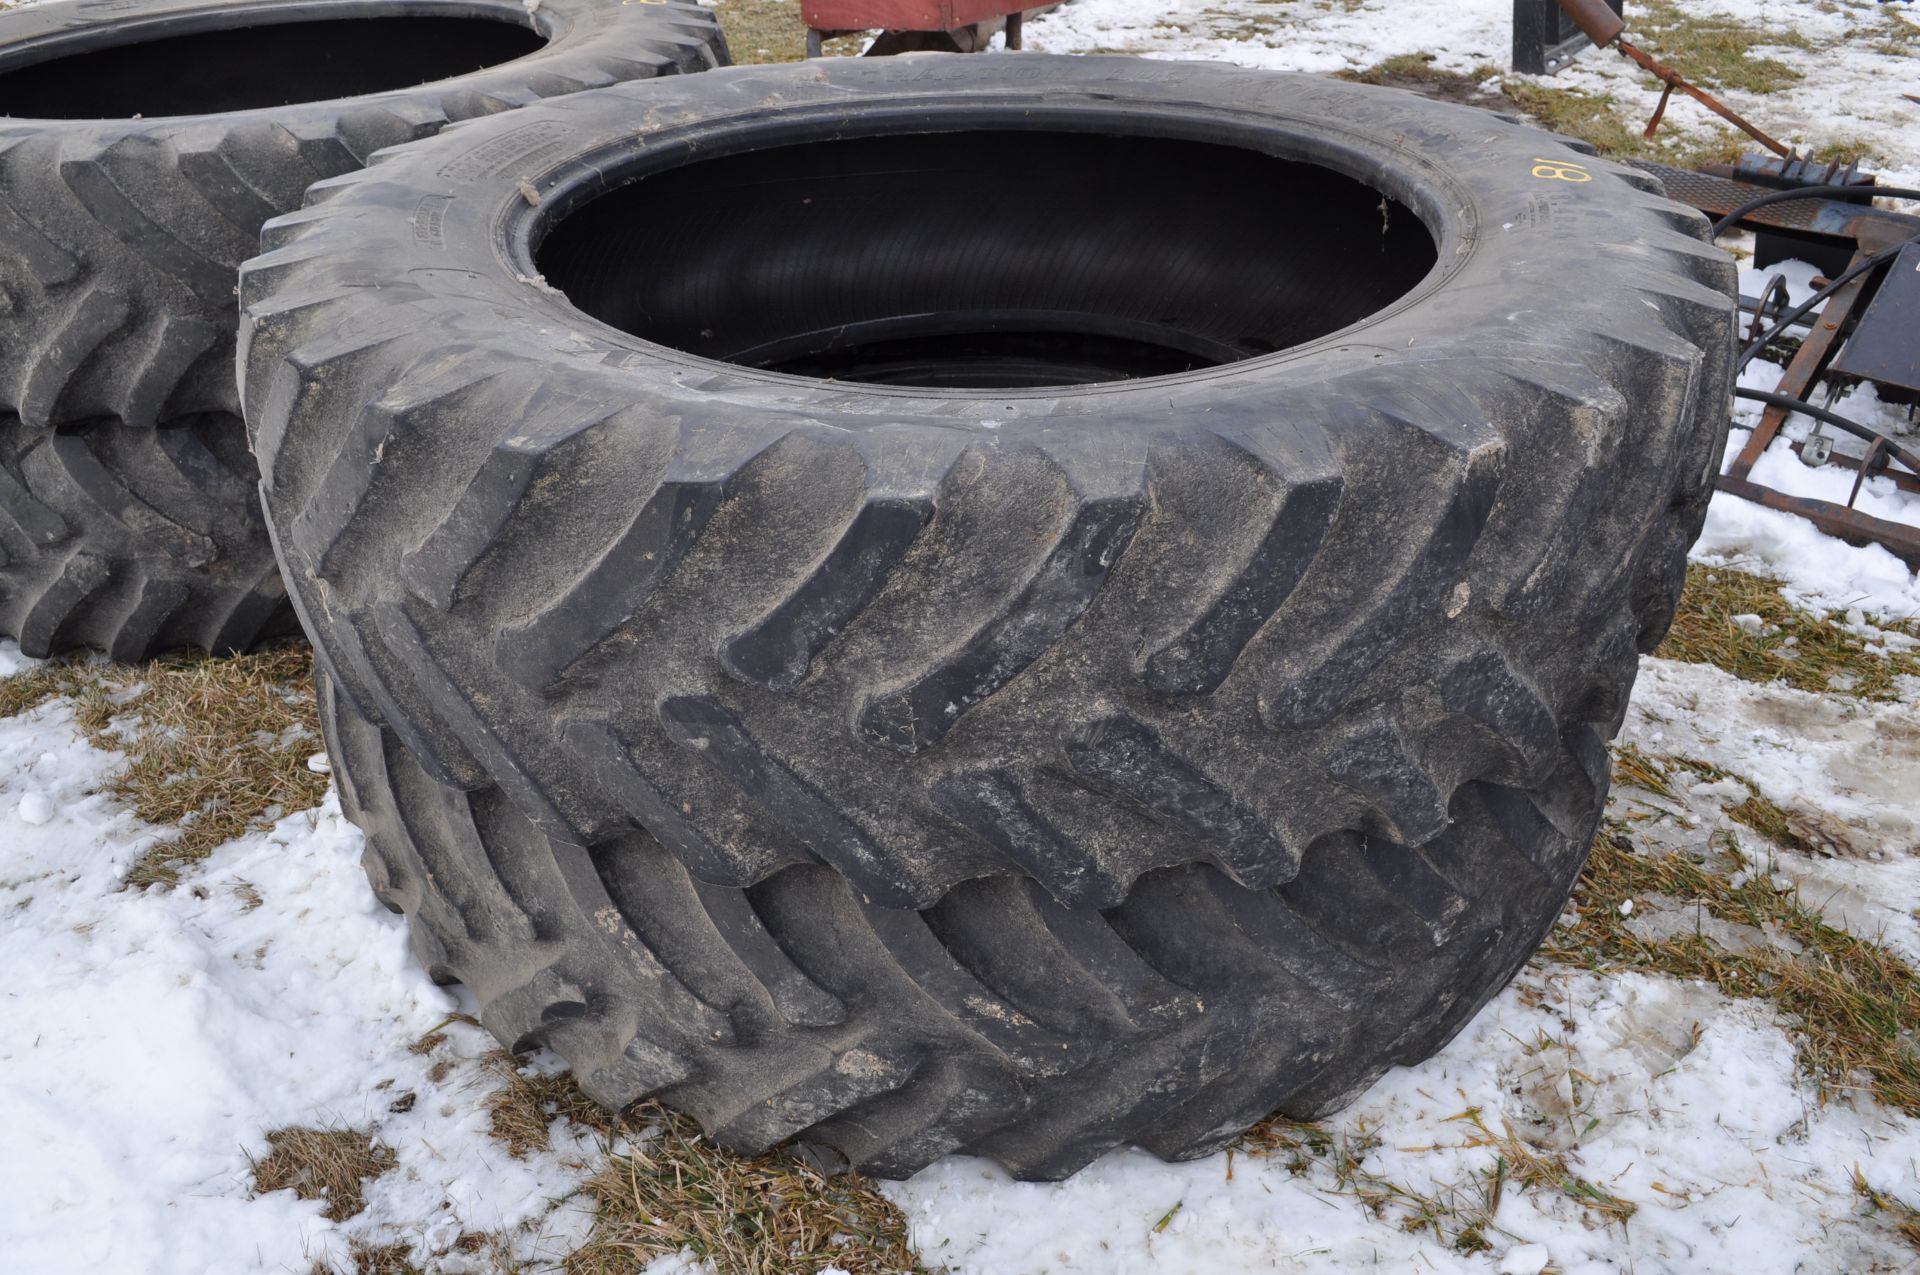 pair 18.4 R 46 tires - Image 3 of 3